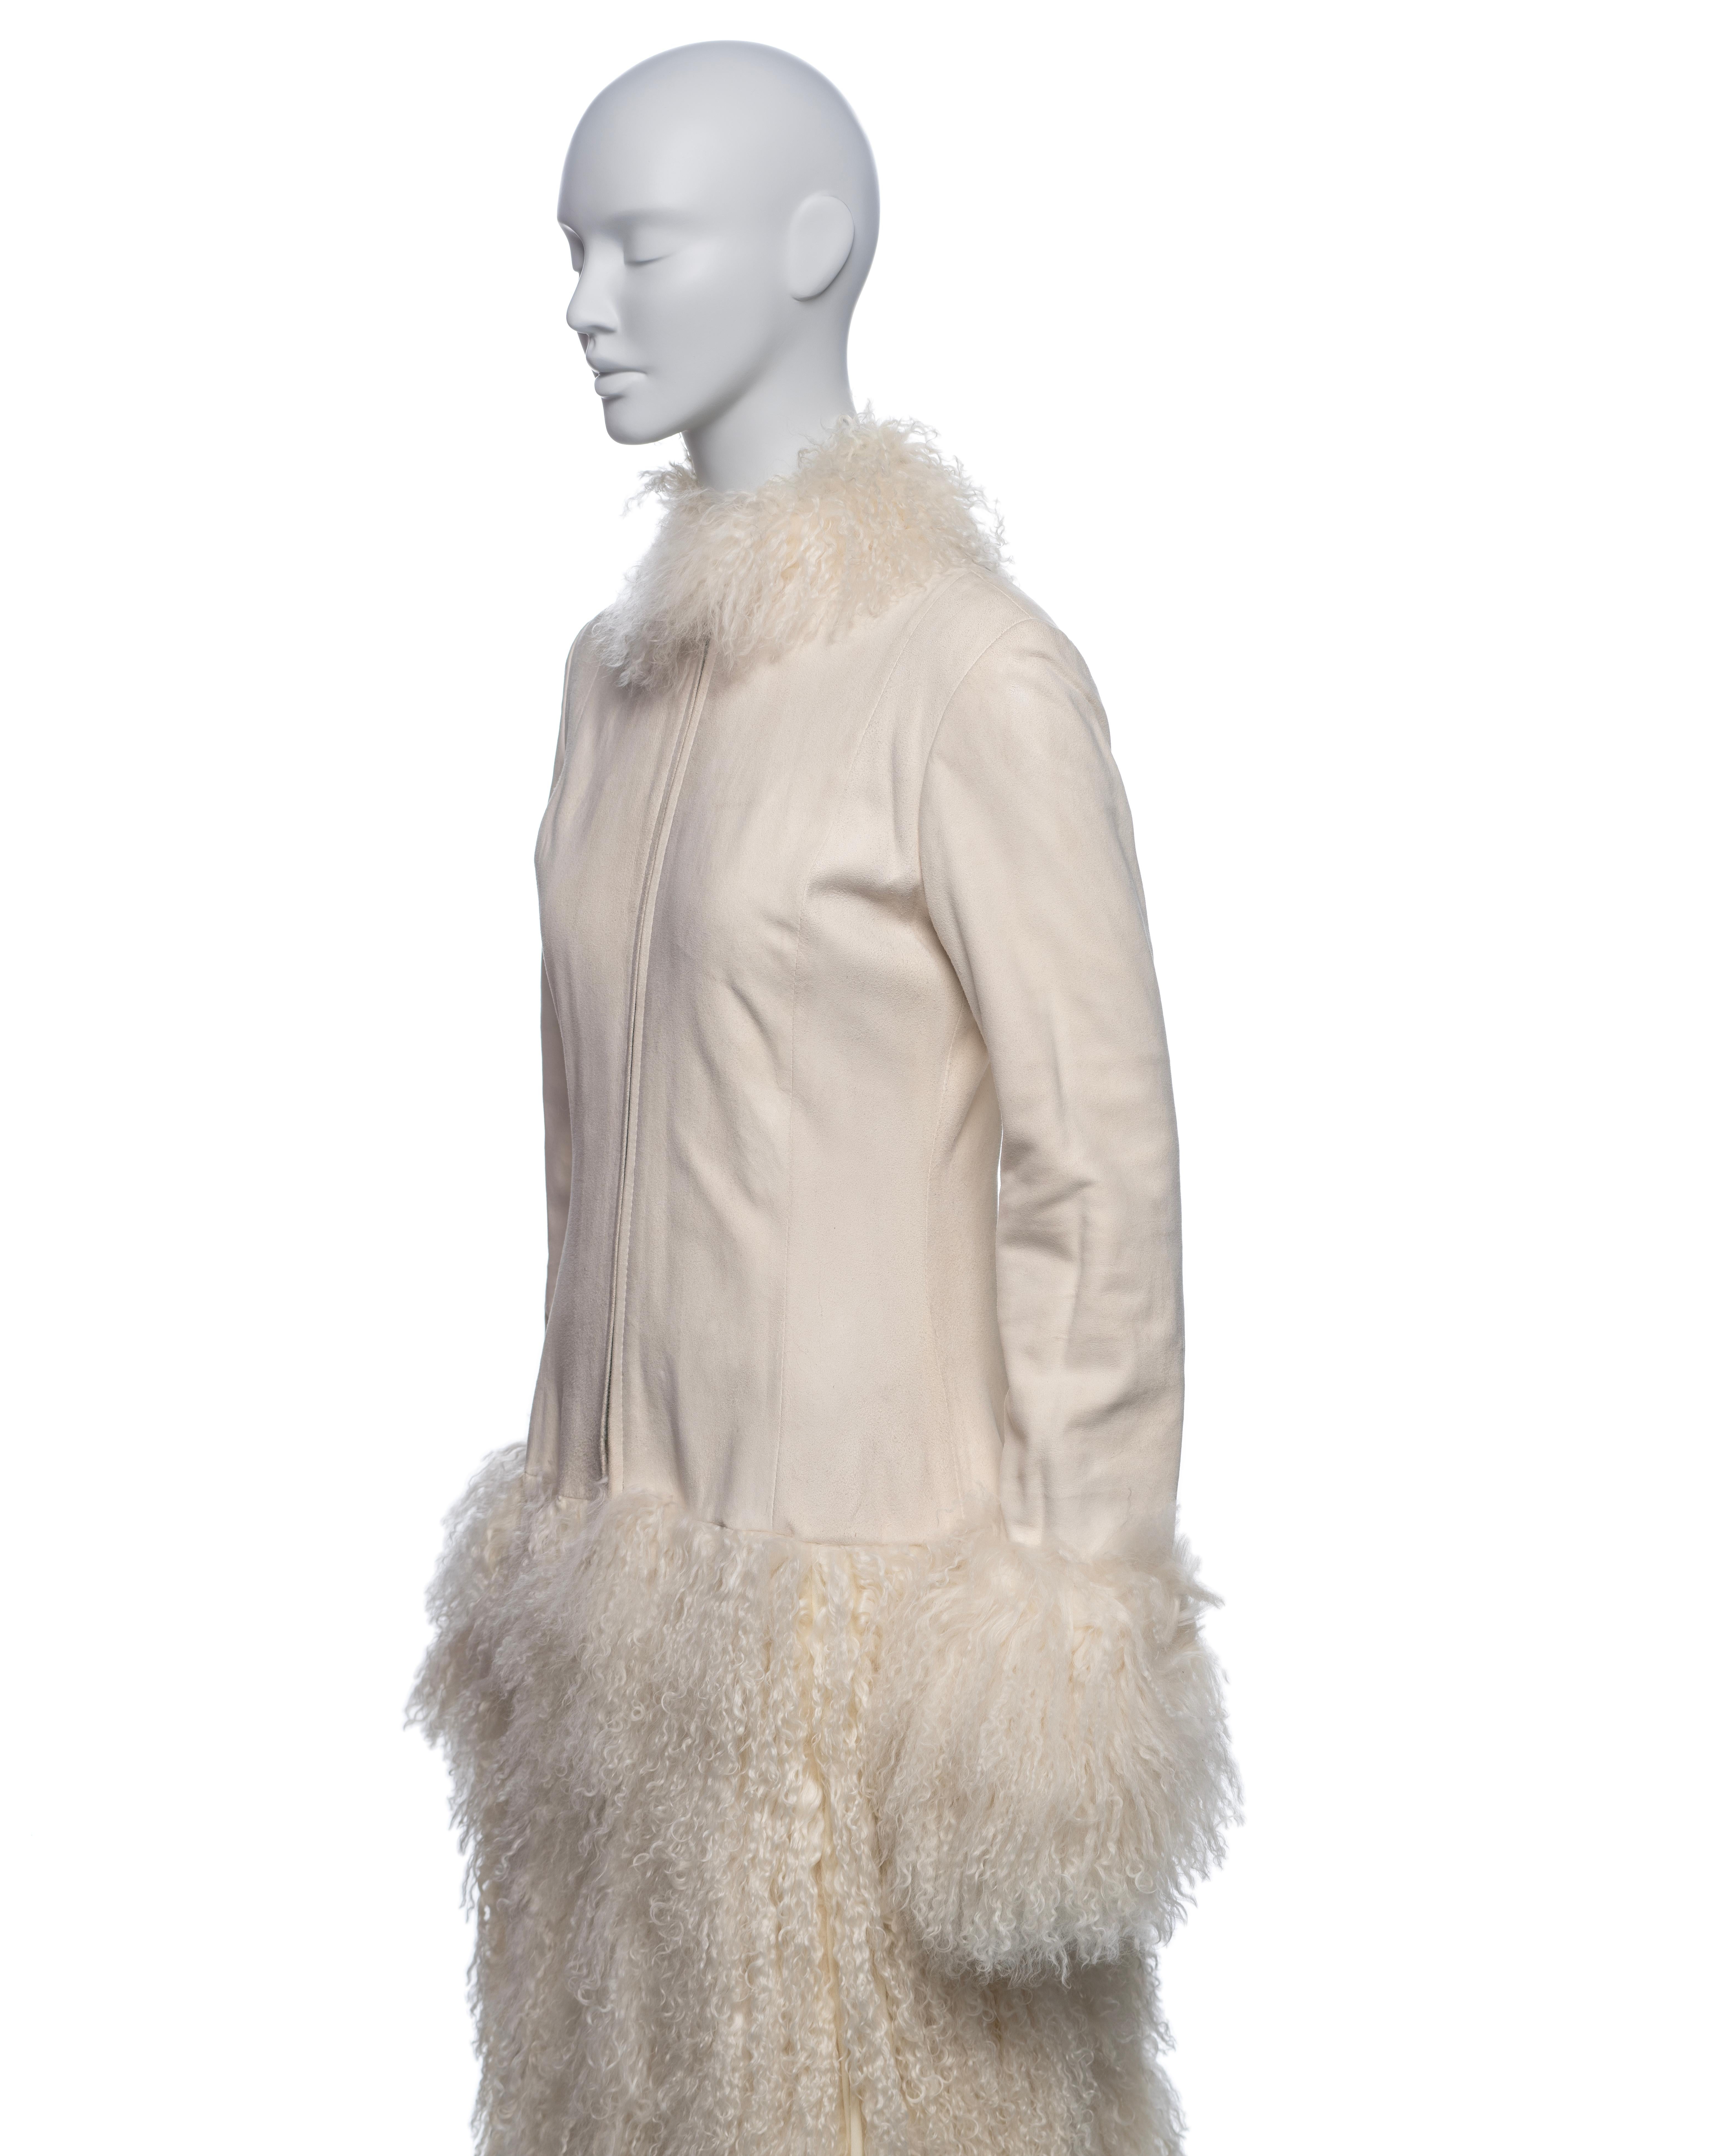 Jean Paul Gaultier White Mongolian Lamb Fur and Leather Coat Dress, FW 2006 For Sale 12